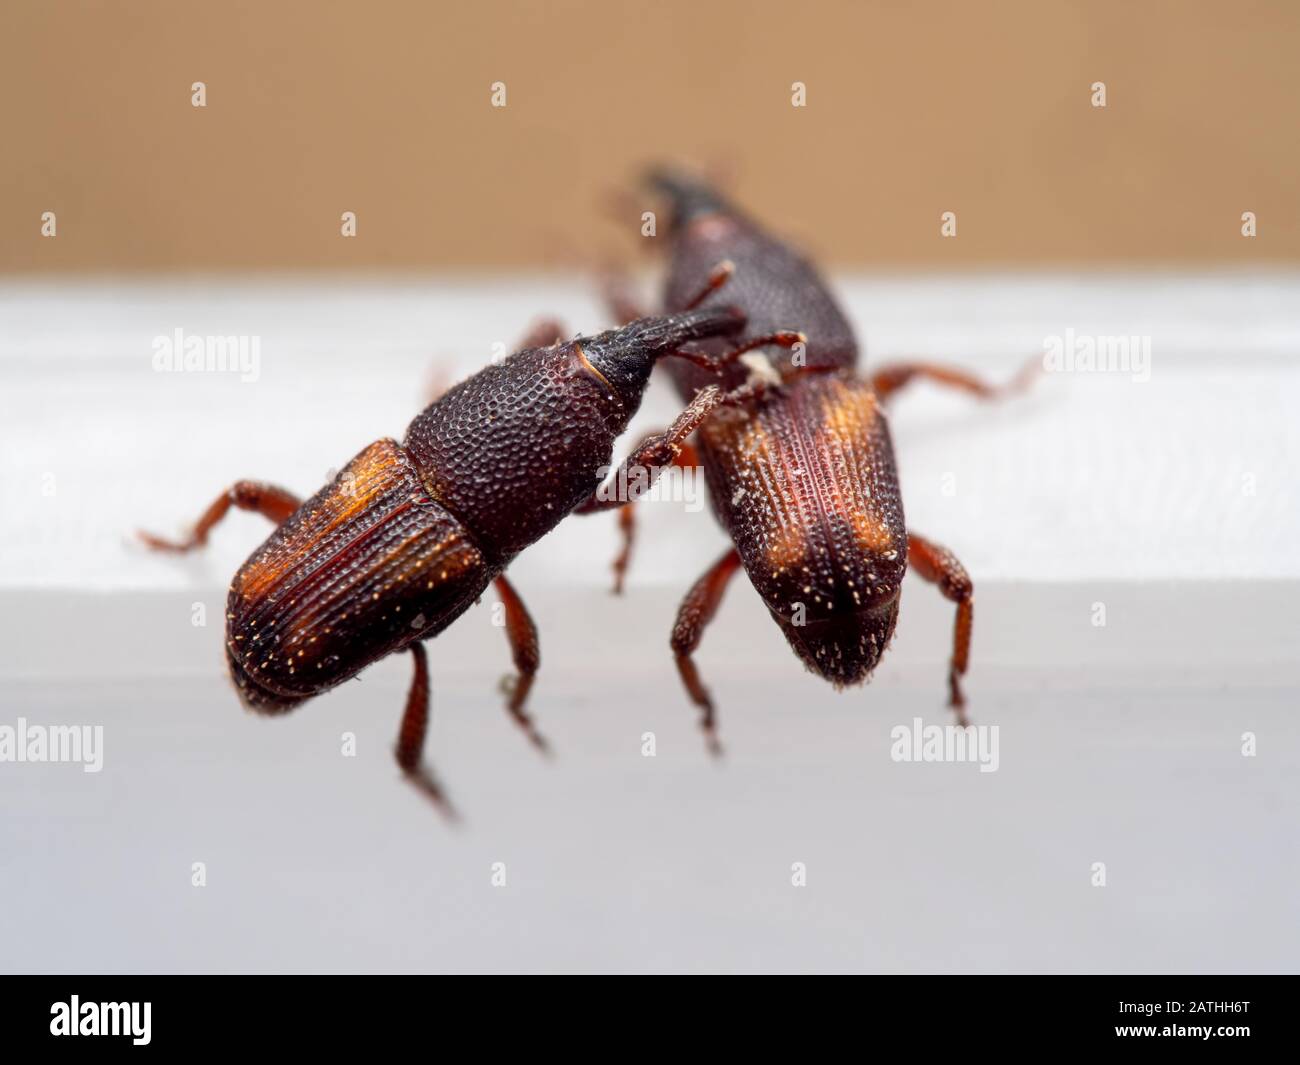 Macro Photography of Two Rice Weevil or Sitophilus Oryzae Stock Photo